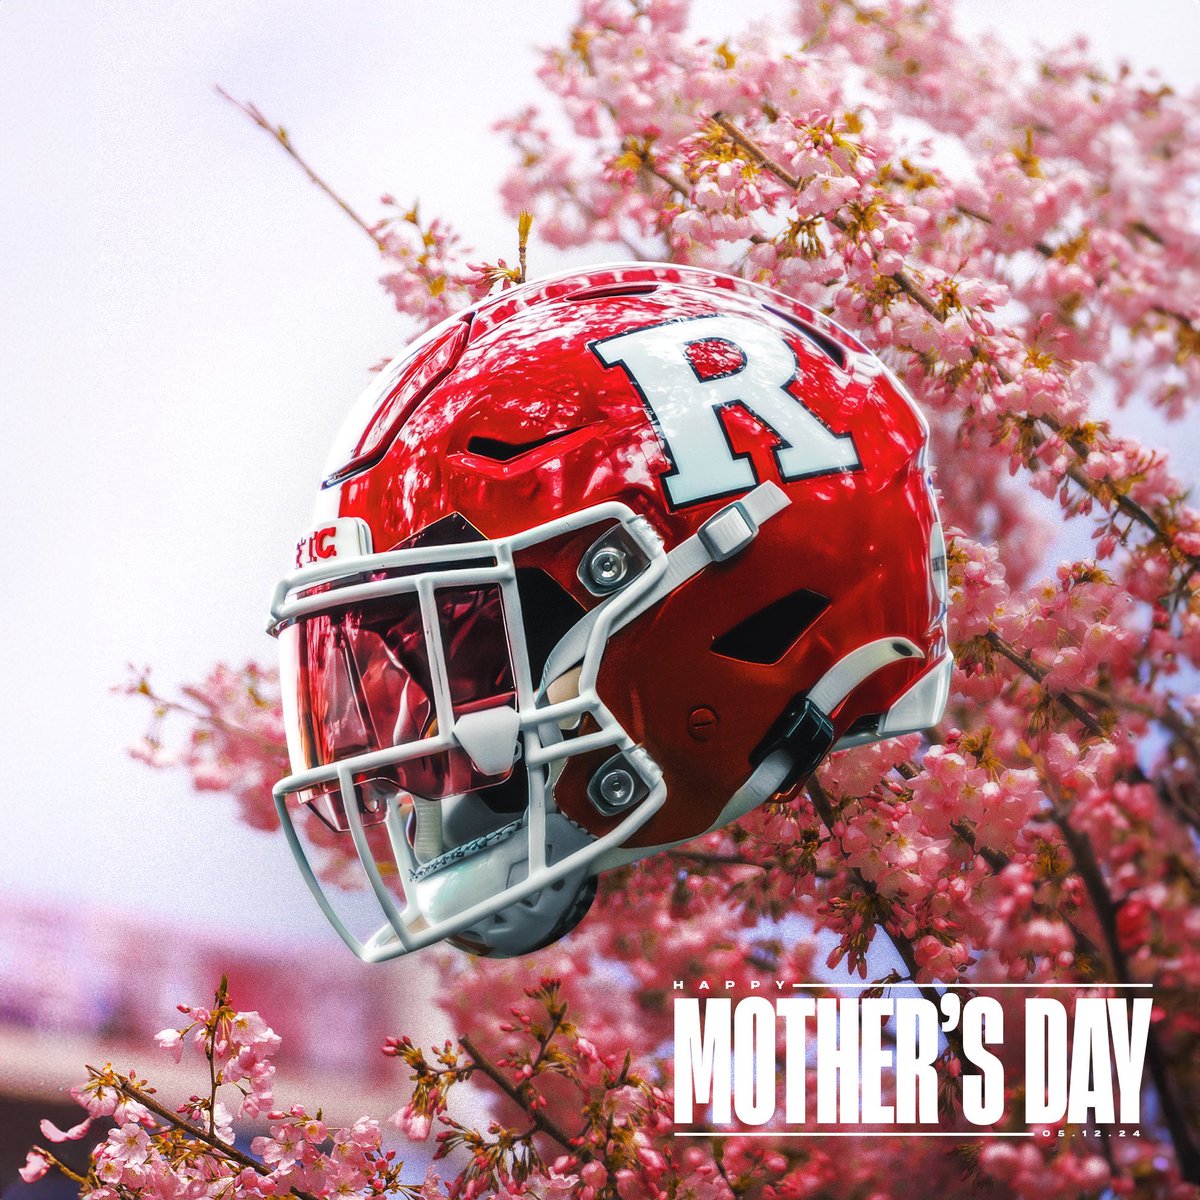 Happy Mother’s Day To The Incredible Mom’s, Grandma’s, Sister’s, Aunt’s Out There! #FTC